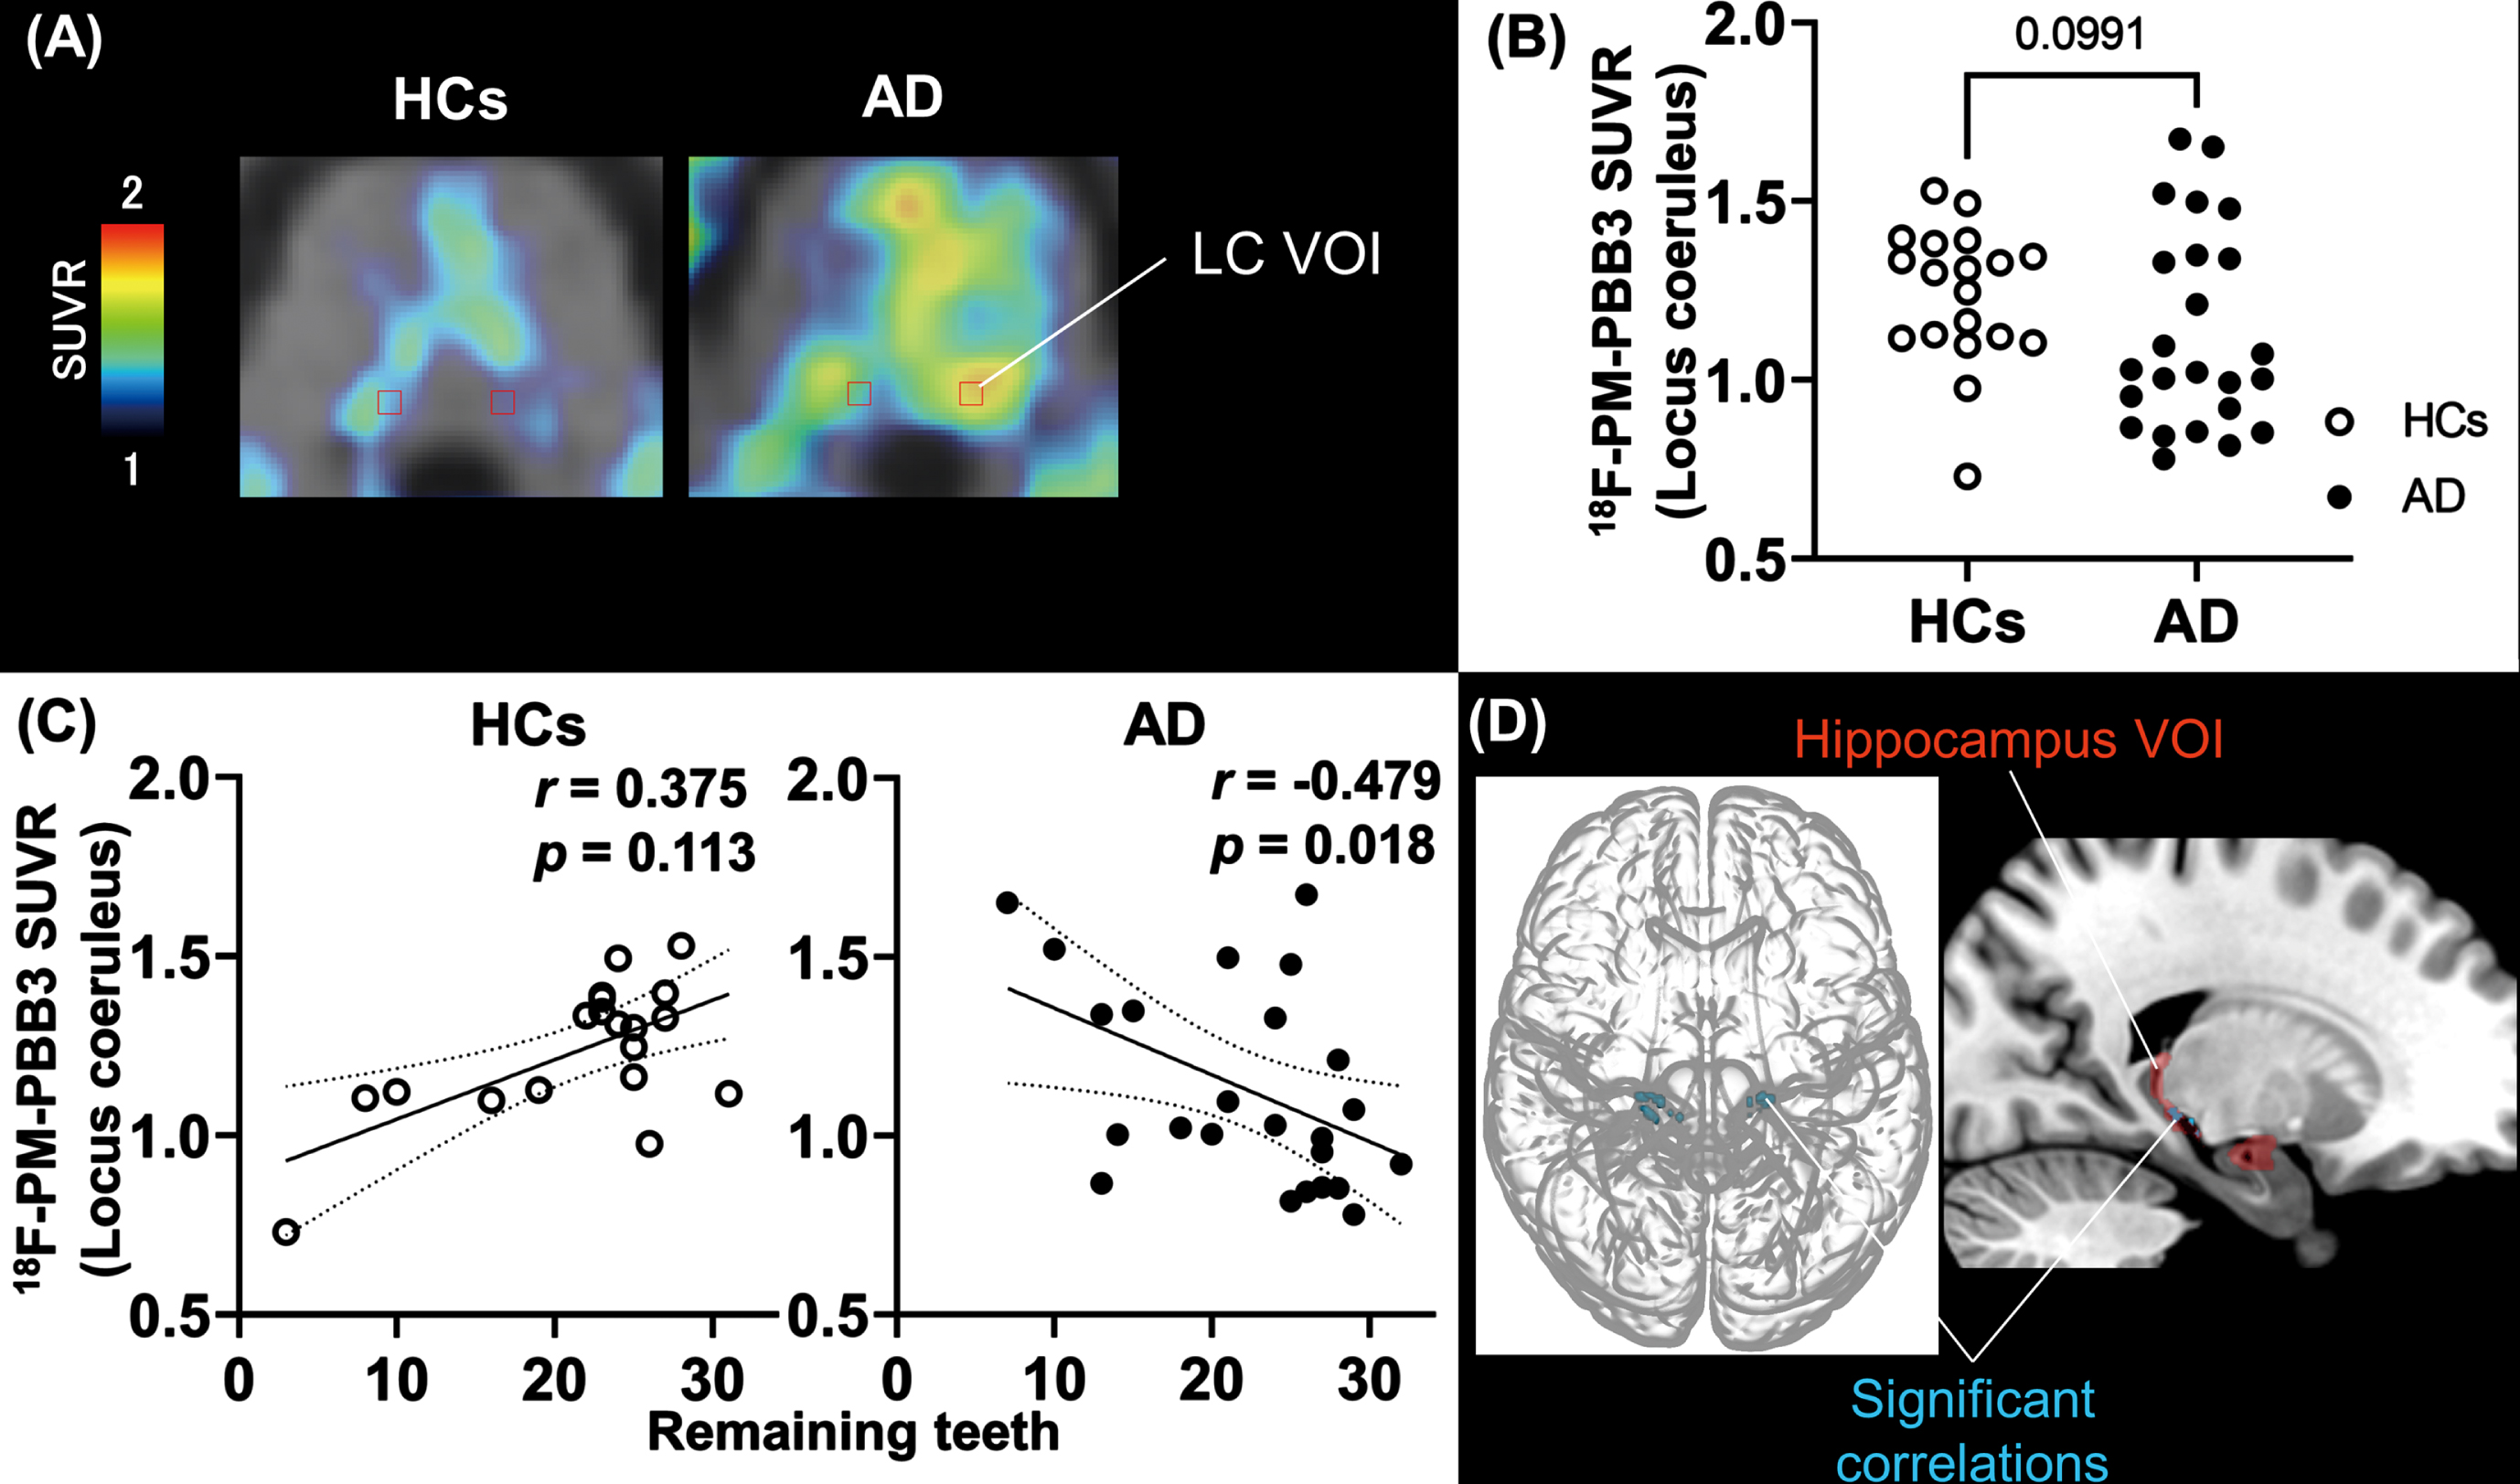 Number of remaining teeth and correlation with tau lesions in the locus coeruleus and hippocampal region. A) Anatomical volume of interest of locus coeruleus (LC-VOI) on normalized PET and MRI images of HCs and AD. B) Group comparison of tau PET SUVR values in LC-VOI between HCs and AD groups. The p value was estimated by Mann-Whitney U-test. Open and filled circles indicate HCs and AD-spectrum patients, respectively. C) Correlations of tau PET SUVR values in LC-VOI and the number of remaining teeth in HC and AD groups; r and p values were assessed by Spearman’s rank correlation test. D) T-maps illustrate that tau PET tracer accumulation was increased in the hippocampal region in association with an increase to LC in AD (uncorrected, p < 0.001). The hippocampus VOI (red) is also overlaid in the right brain image. The cluster size threshold was set to zero according to the size of the LC-VOI. The statistical map was overlaid on the MNI brain. AD, Alzheimer’s disease; HCs, healthy controls; LC, locus coeruleus; MNI, Montreal Neurological Institute; PET, positron emission tomography; SUVR, standard uptake value ratio; VOI, volume of interest.